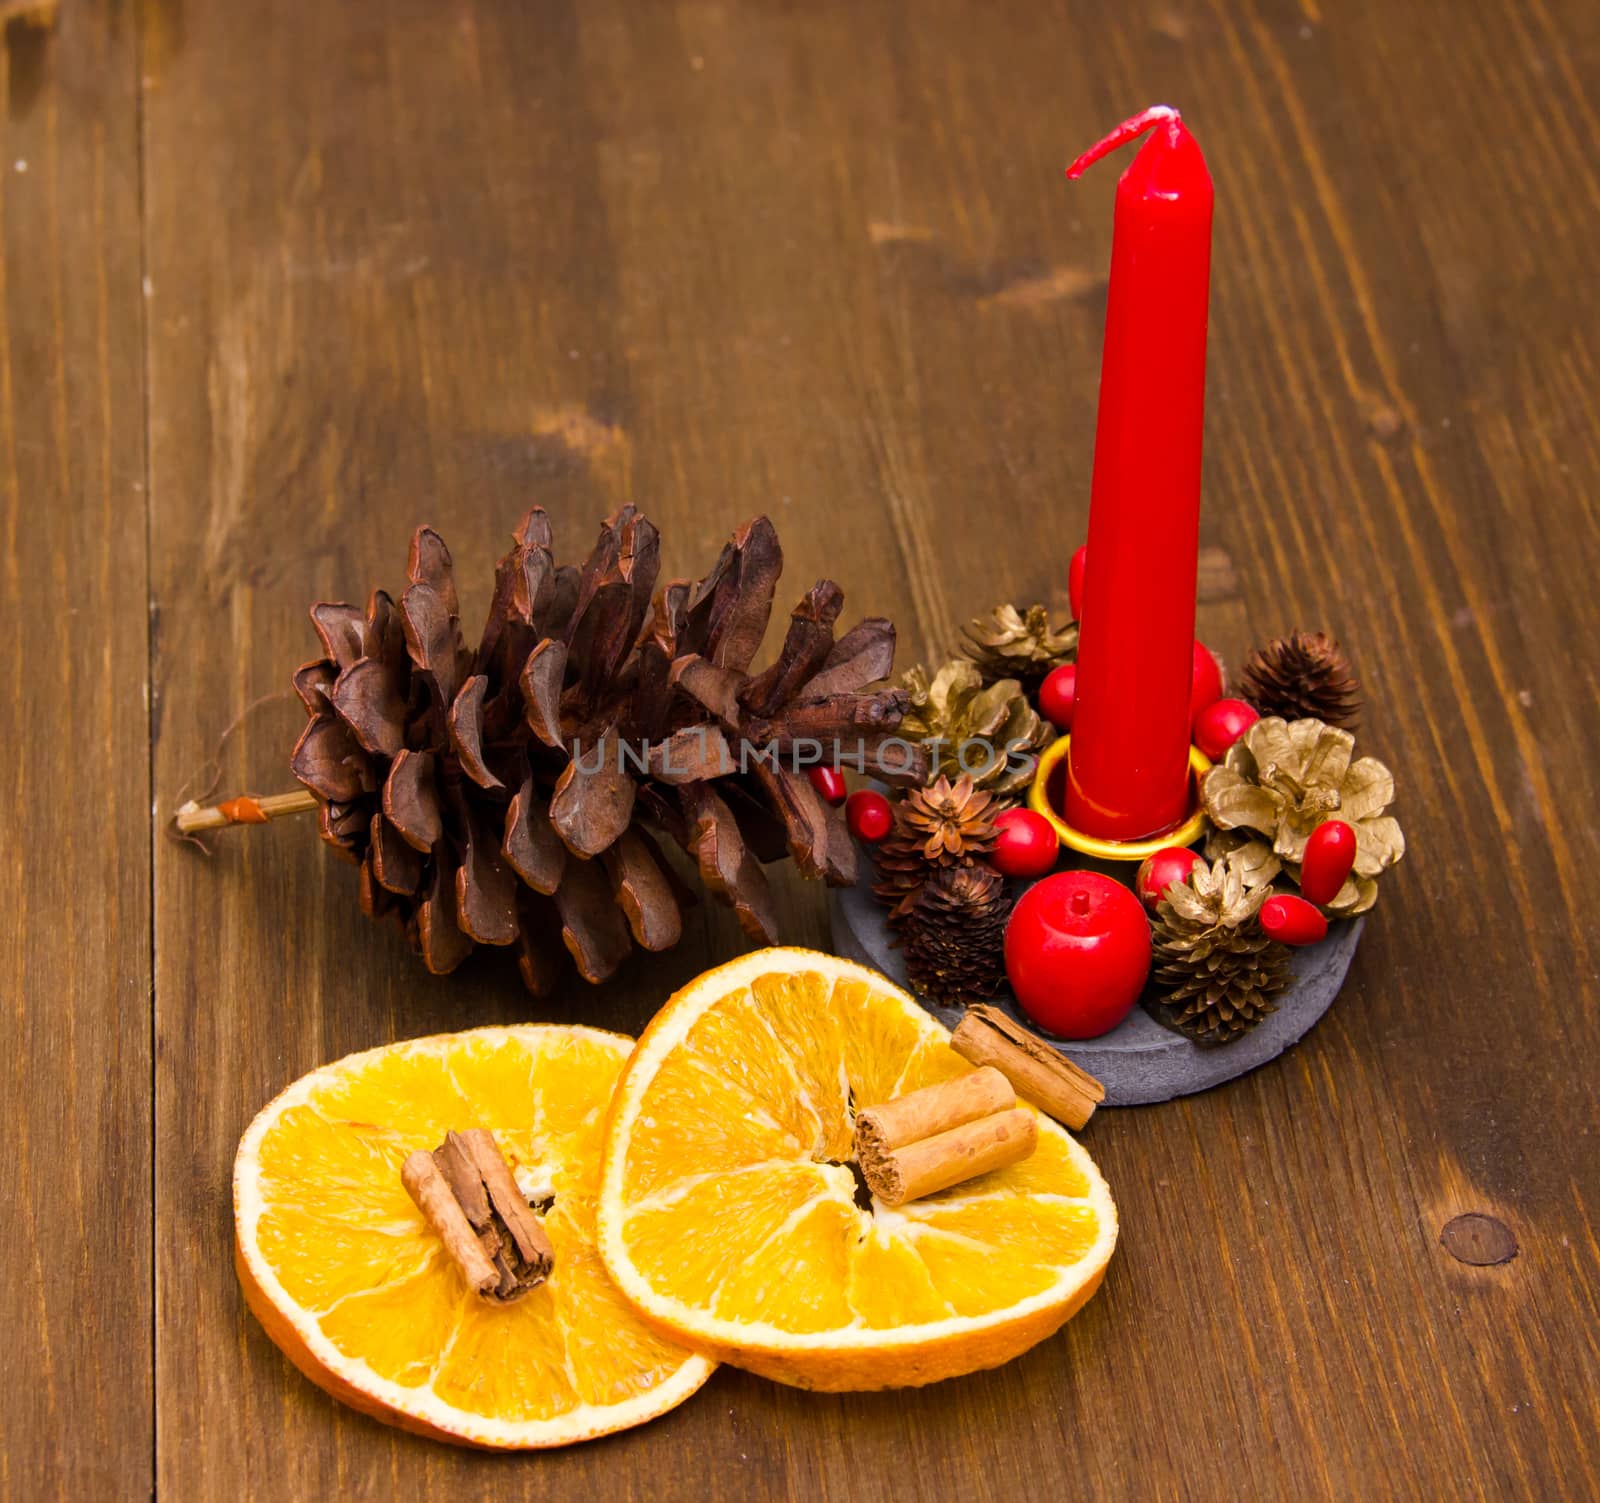 Candle with Christmas decorations on wooden table close up view